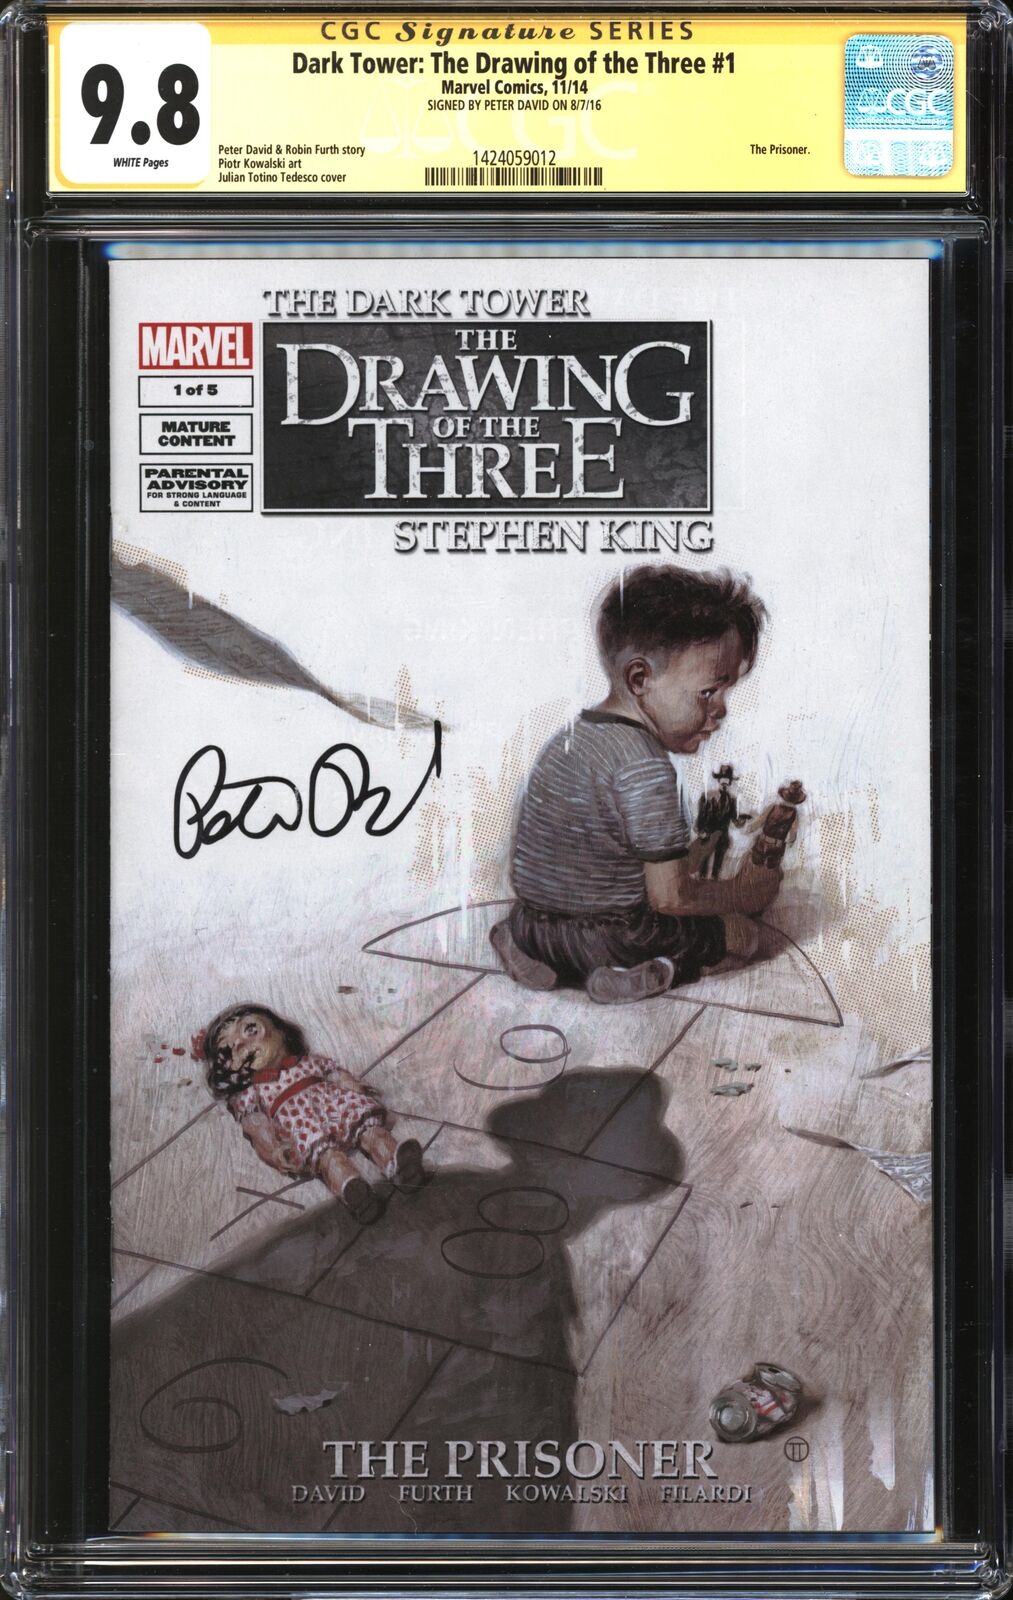 Dark Tower: The Drawing Of The Three (2014) #1 CGC Signature Series 9.8 NM/MT